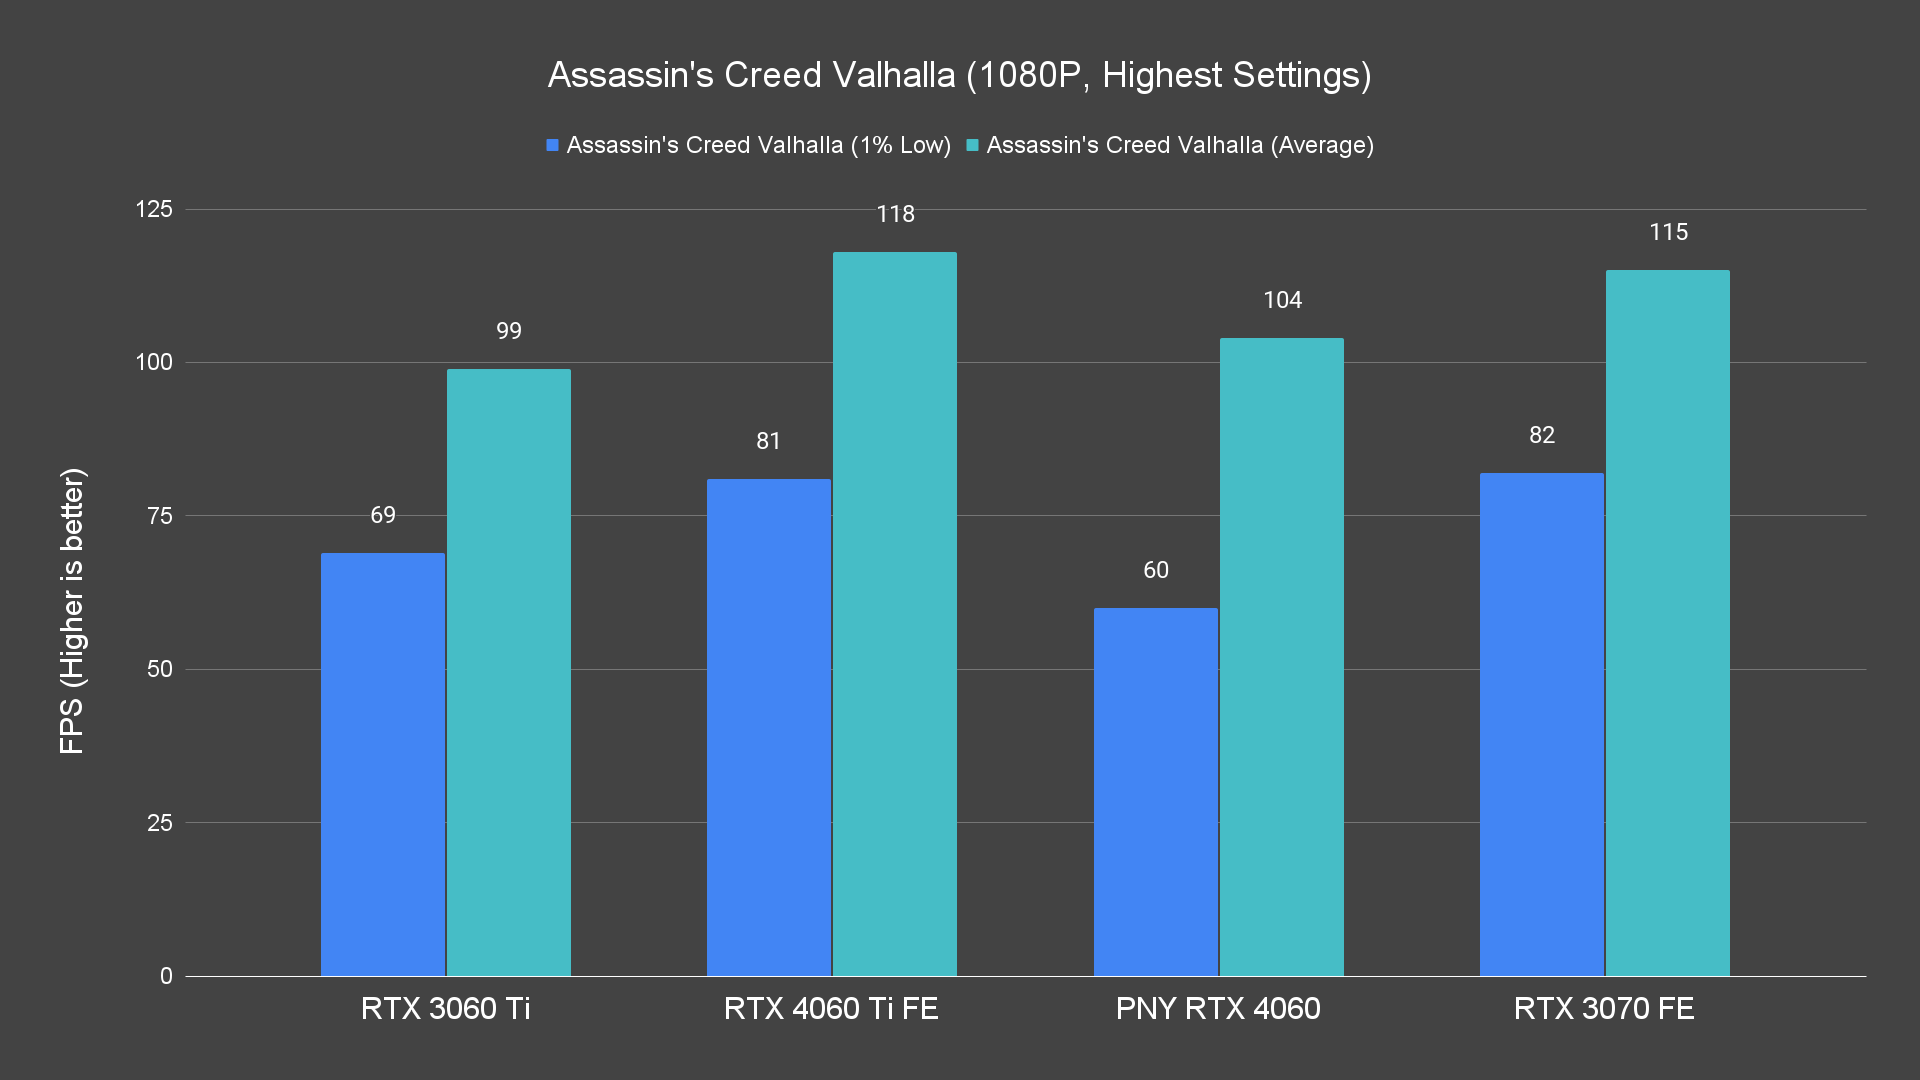 Assassin's Creed Valhalla (1080P, Highest Settings)